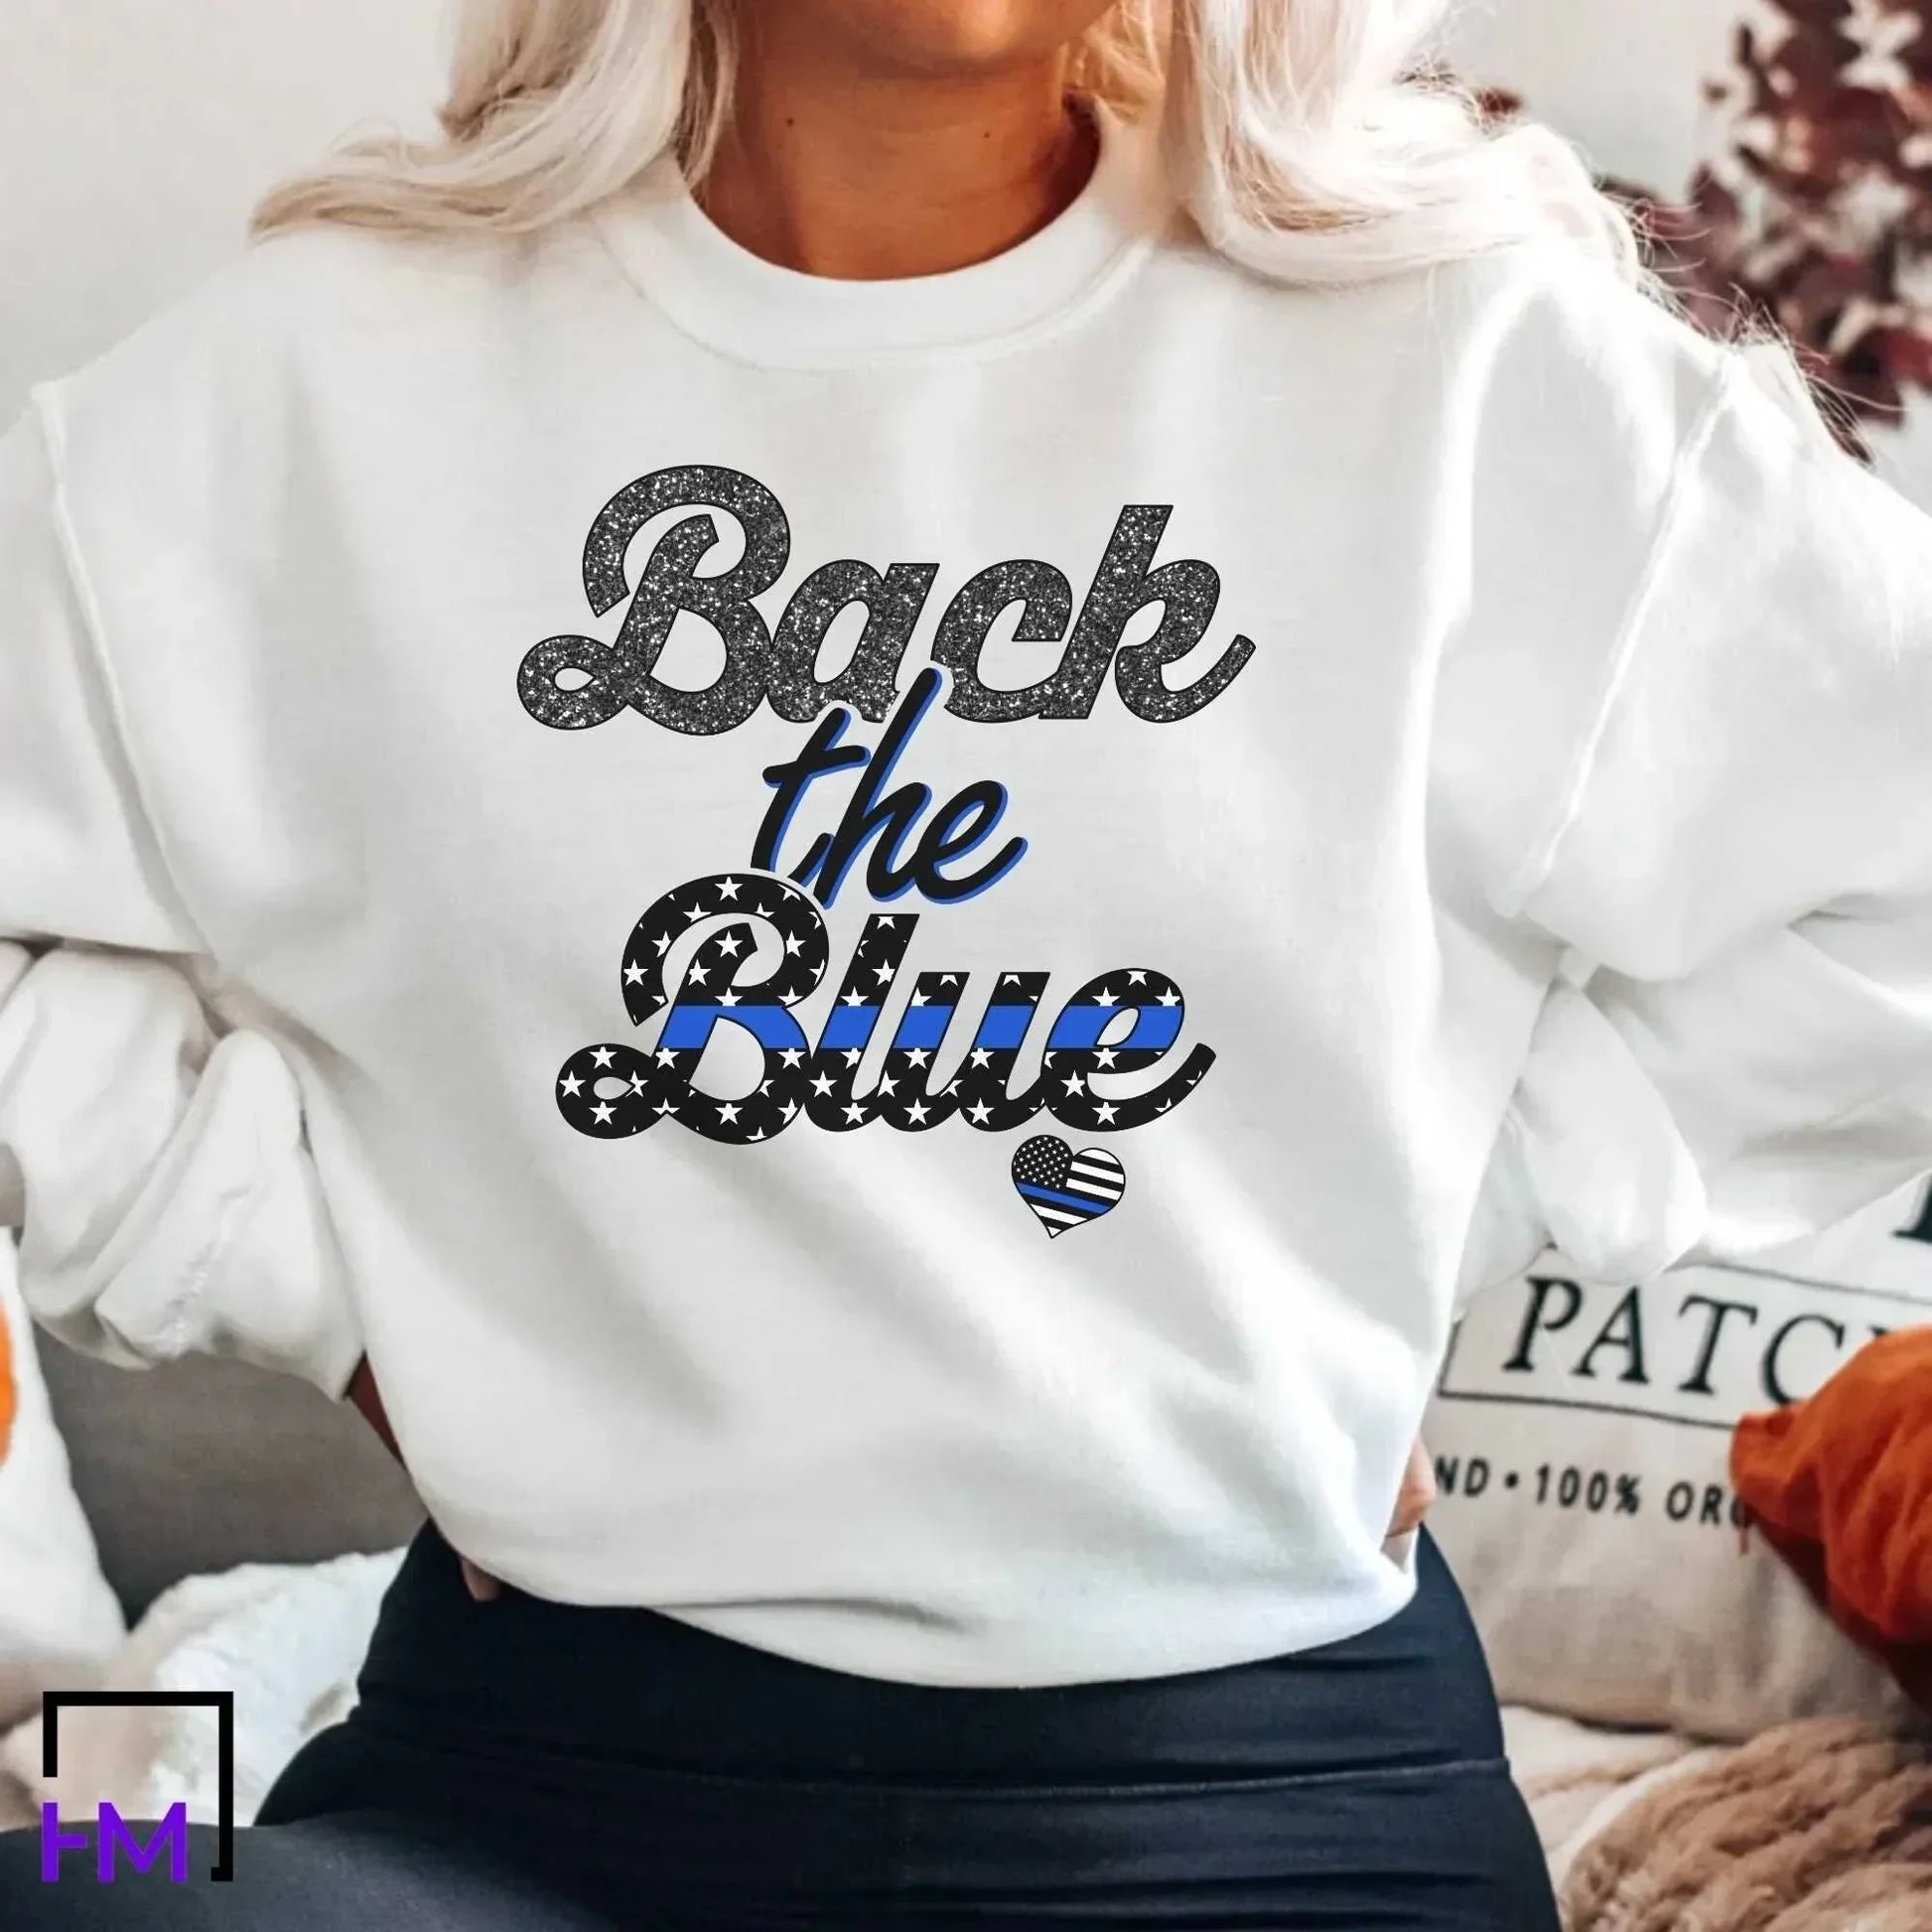 Police Shirt for Women, Police Wife Shirt, Support Police Academy Graduate, Police Mom Gift, Back the Blue Sweater, Gift for Police Officer